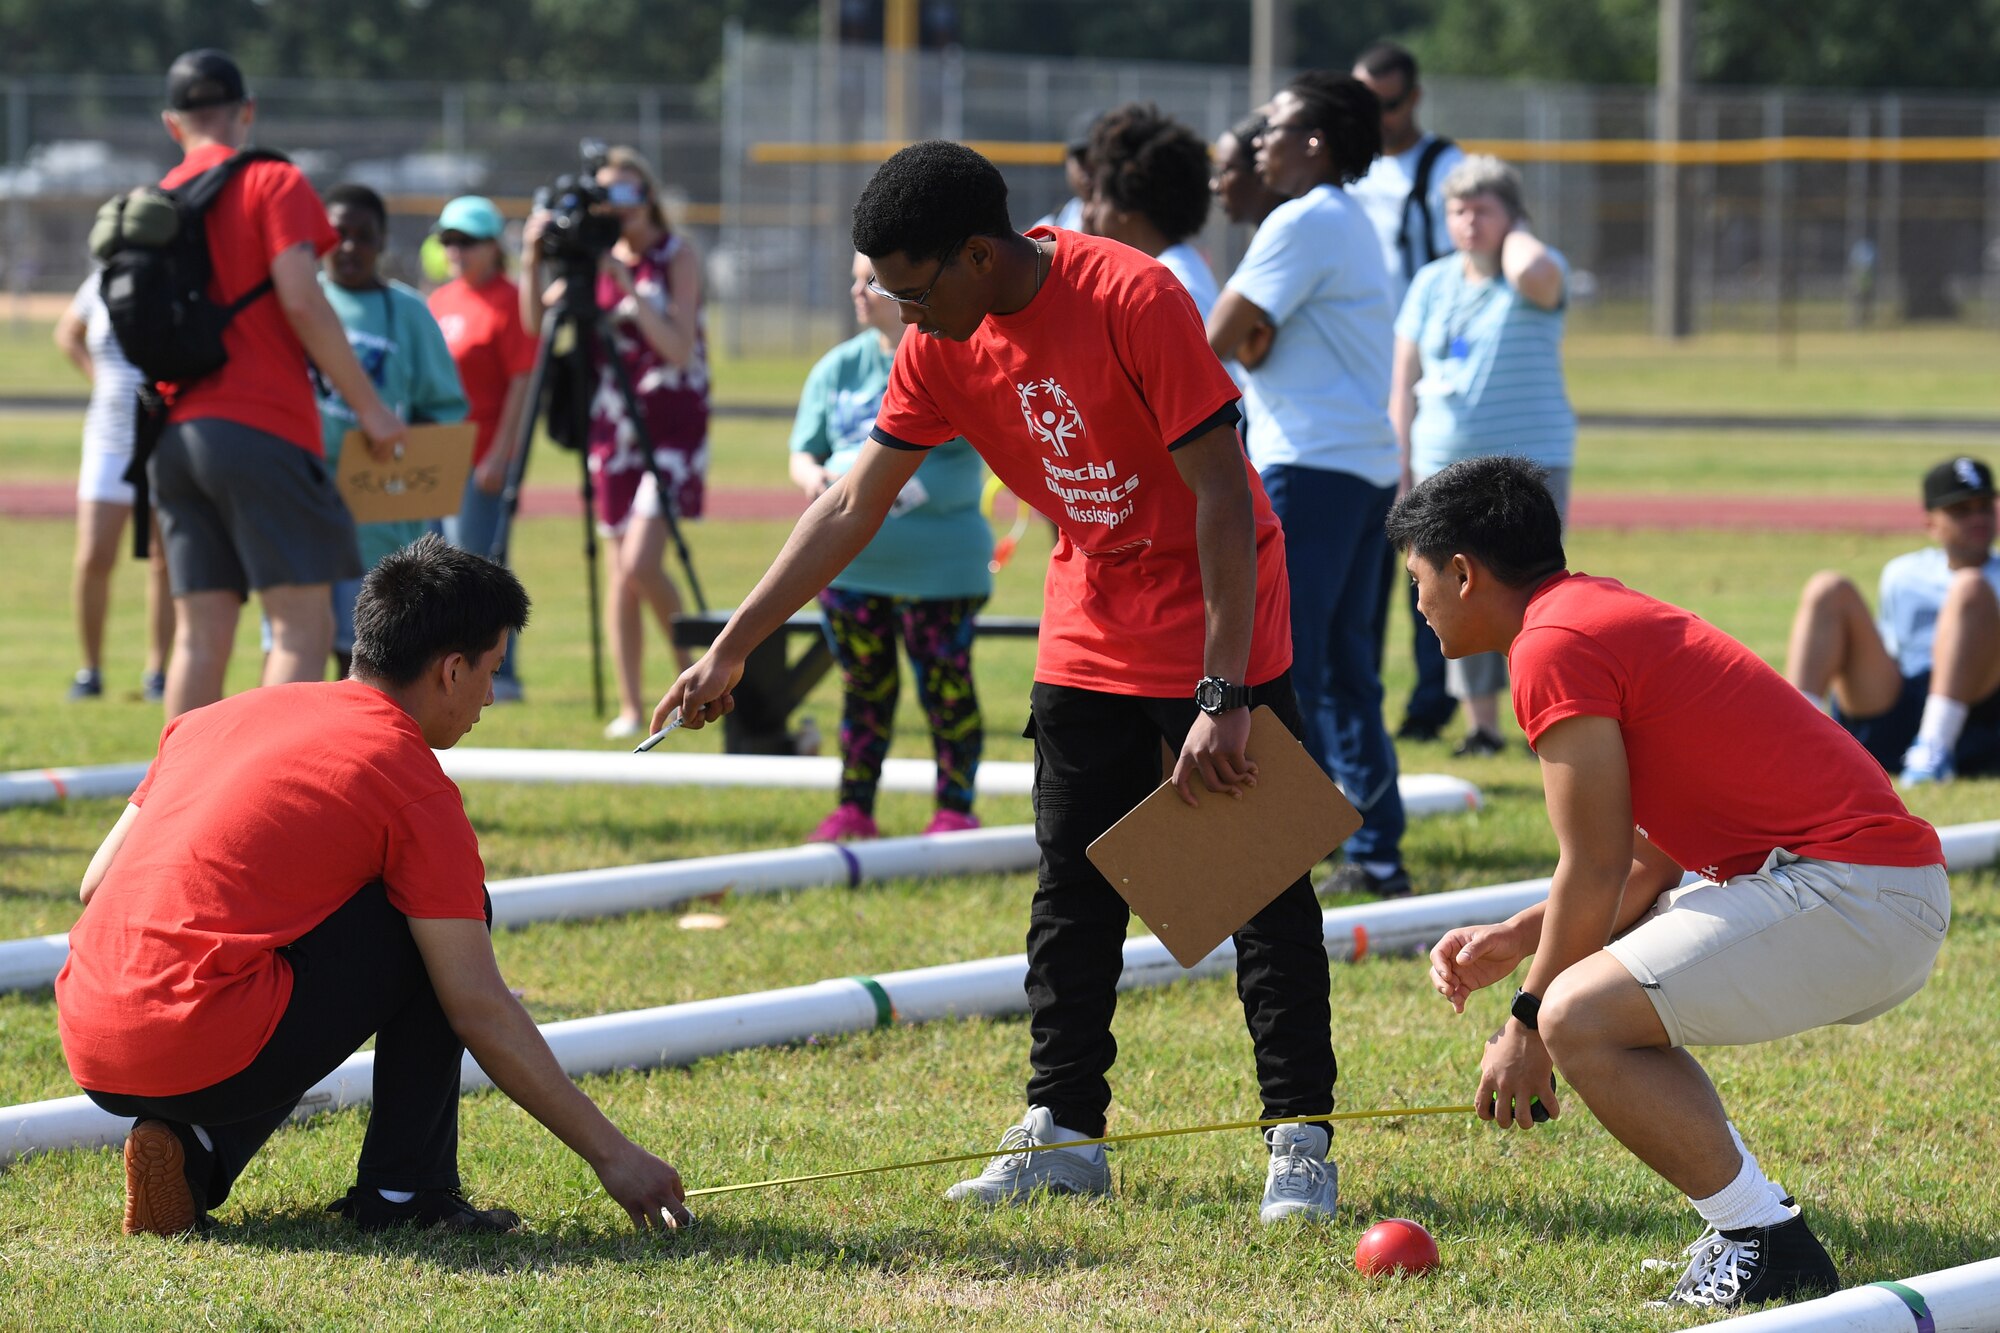 U.S. Air Force Airman 1st Class Diego Vasquez Acosta, Airman Basic Orville Wright, Airman 1st Class James Muyano, 366th Training Squadron students, volunteer during the Special Olympics Mississippi Summer Games at Keesler Air Force Base, Miss., May 14, 2022. Over 600 athletes participated in the Summer Games. (U.S. Air Force photo by Kemberly Groue)